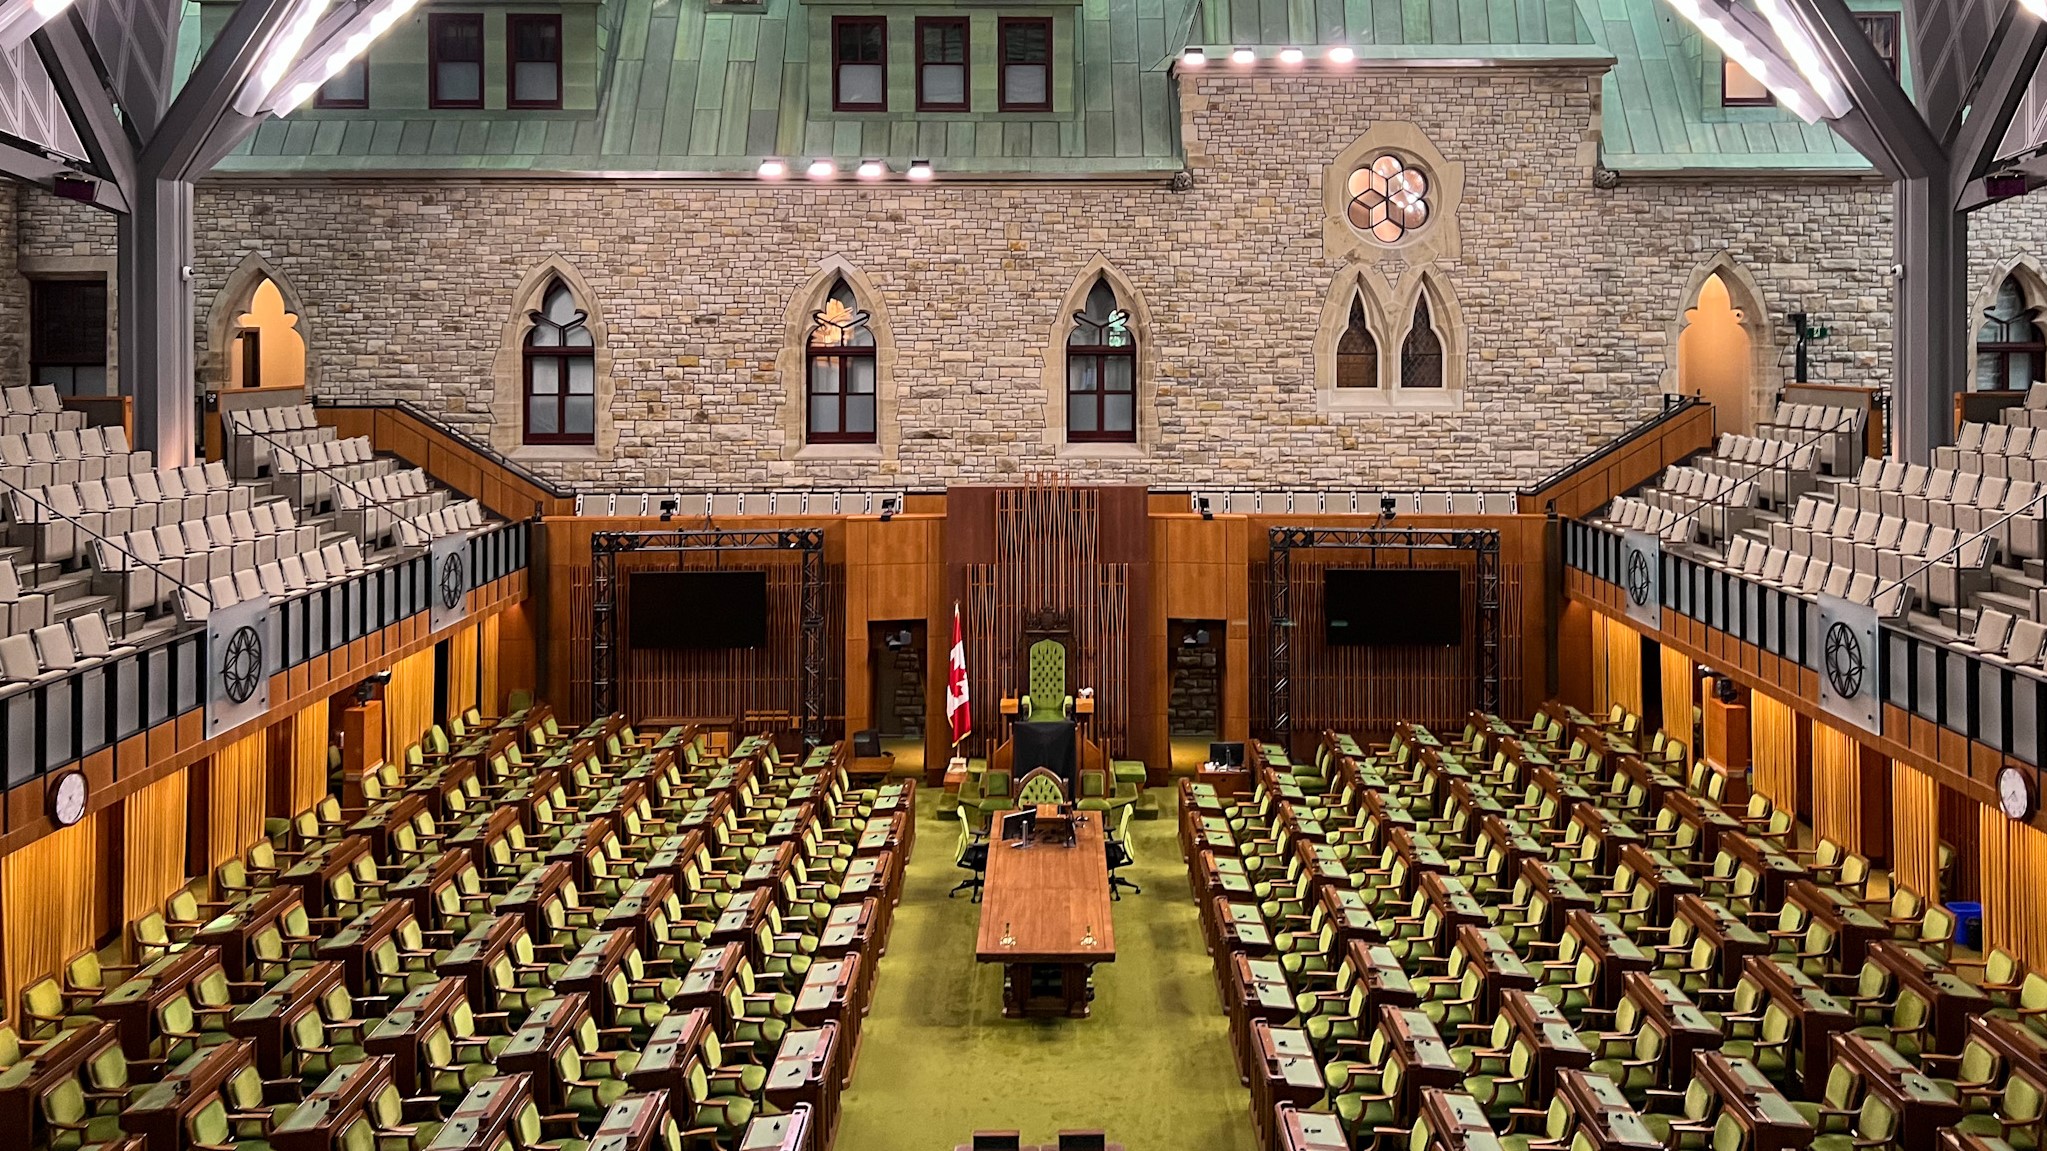 Canadian House of Commons